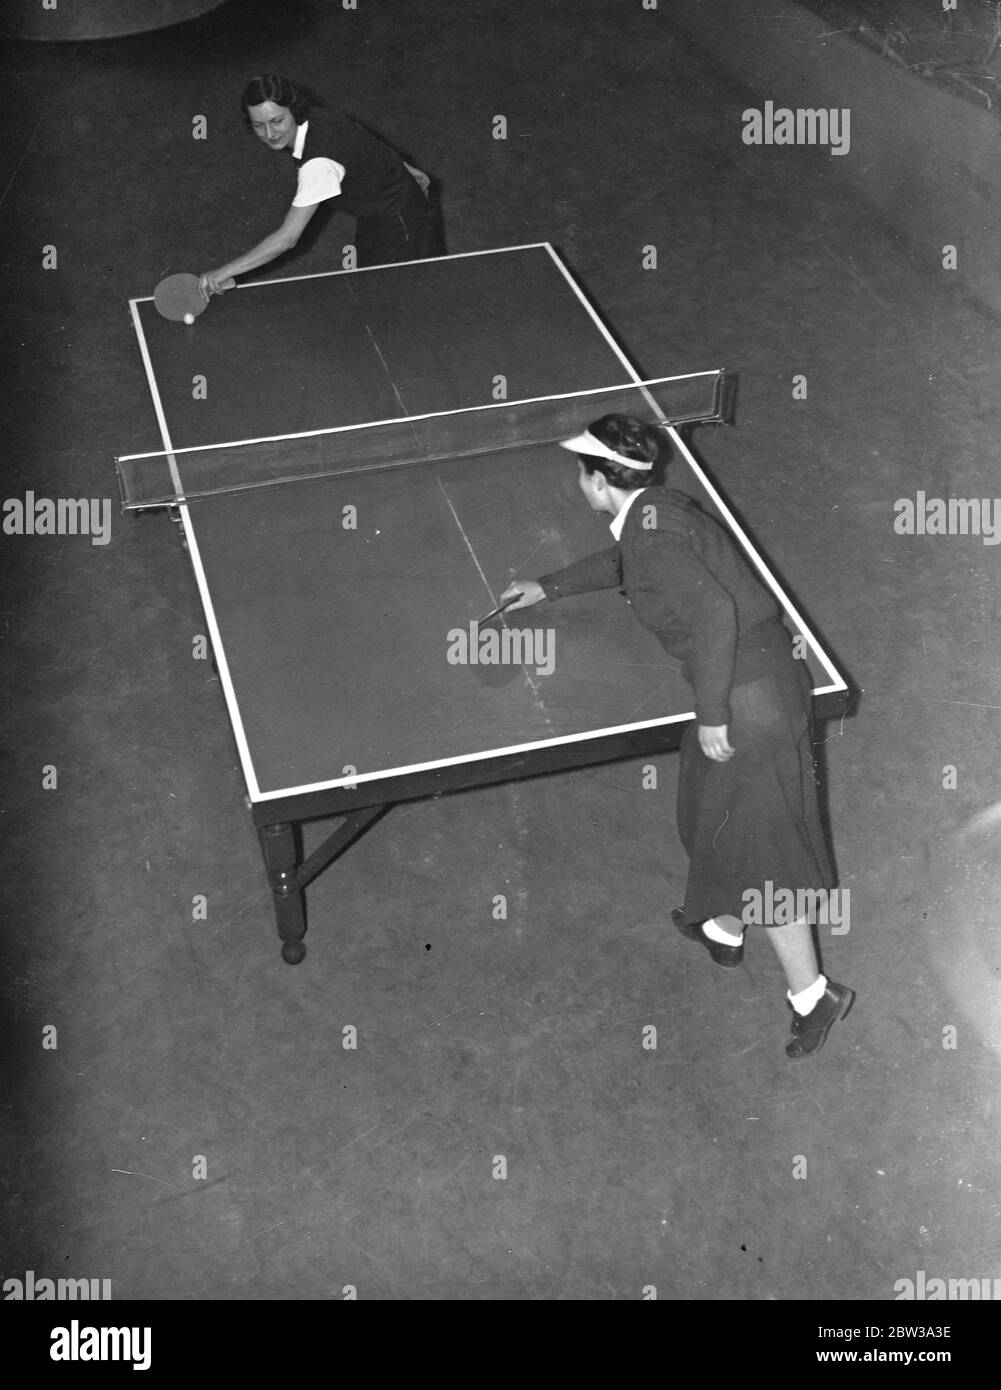 German women players in action at table tennis championships at the Imperial Institute , Kensington . A overhead view of two German players in action - further from camera is Frau Krebabech , and nearer camera is Fraulein Bussmann . 9 February 1935 Stock Photo